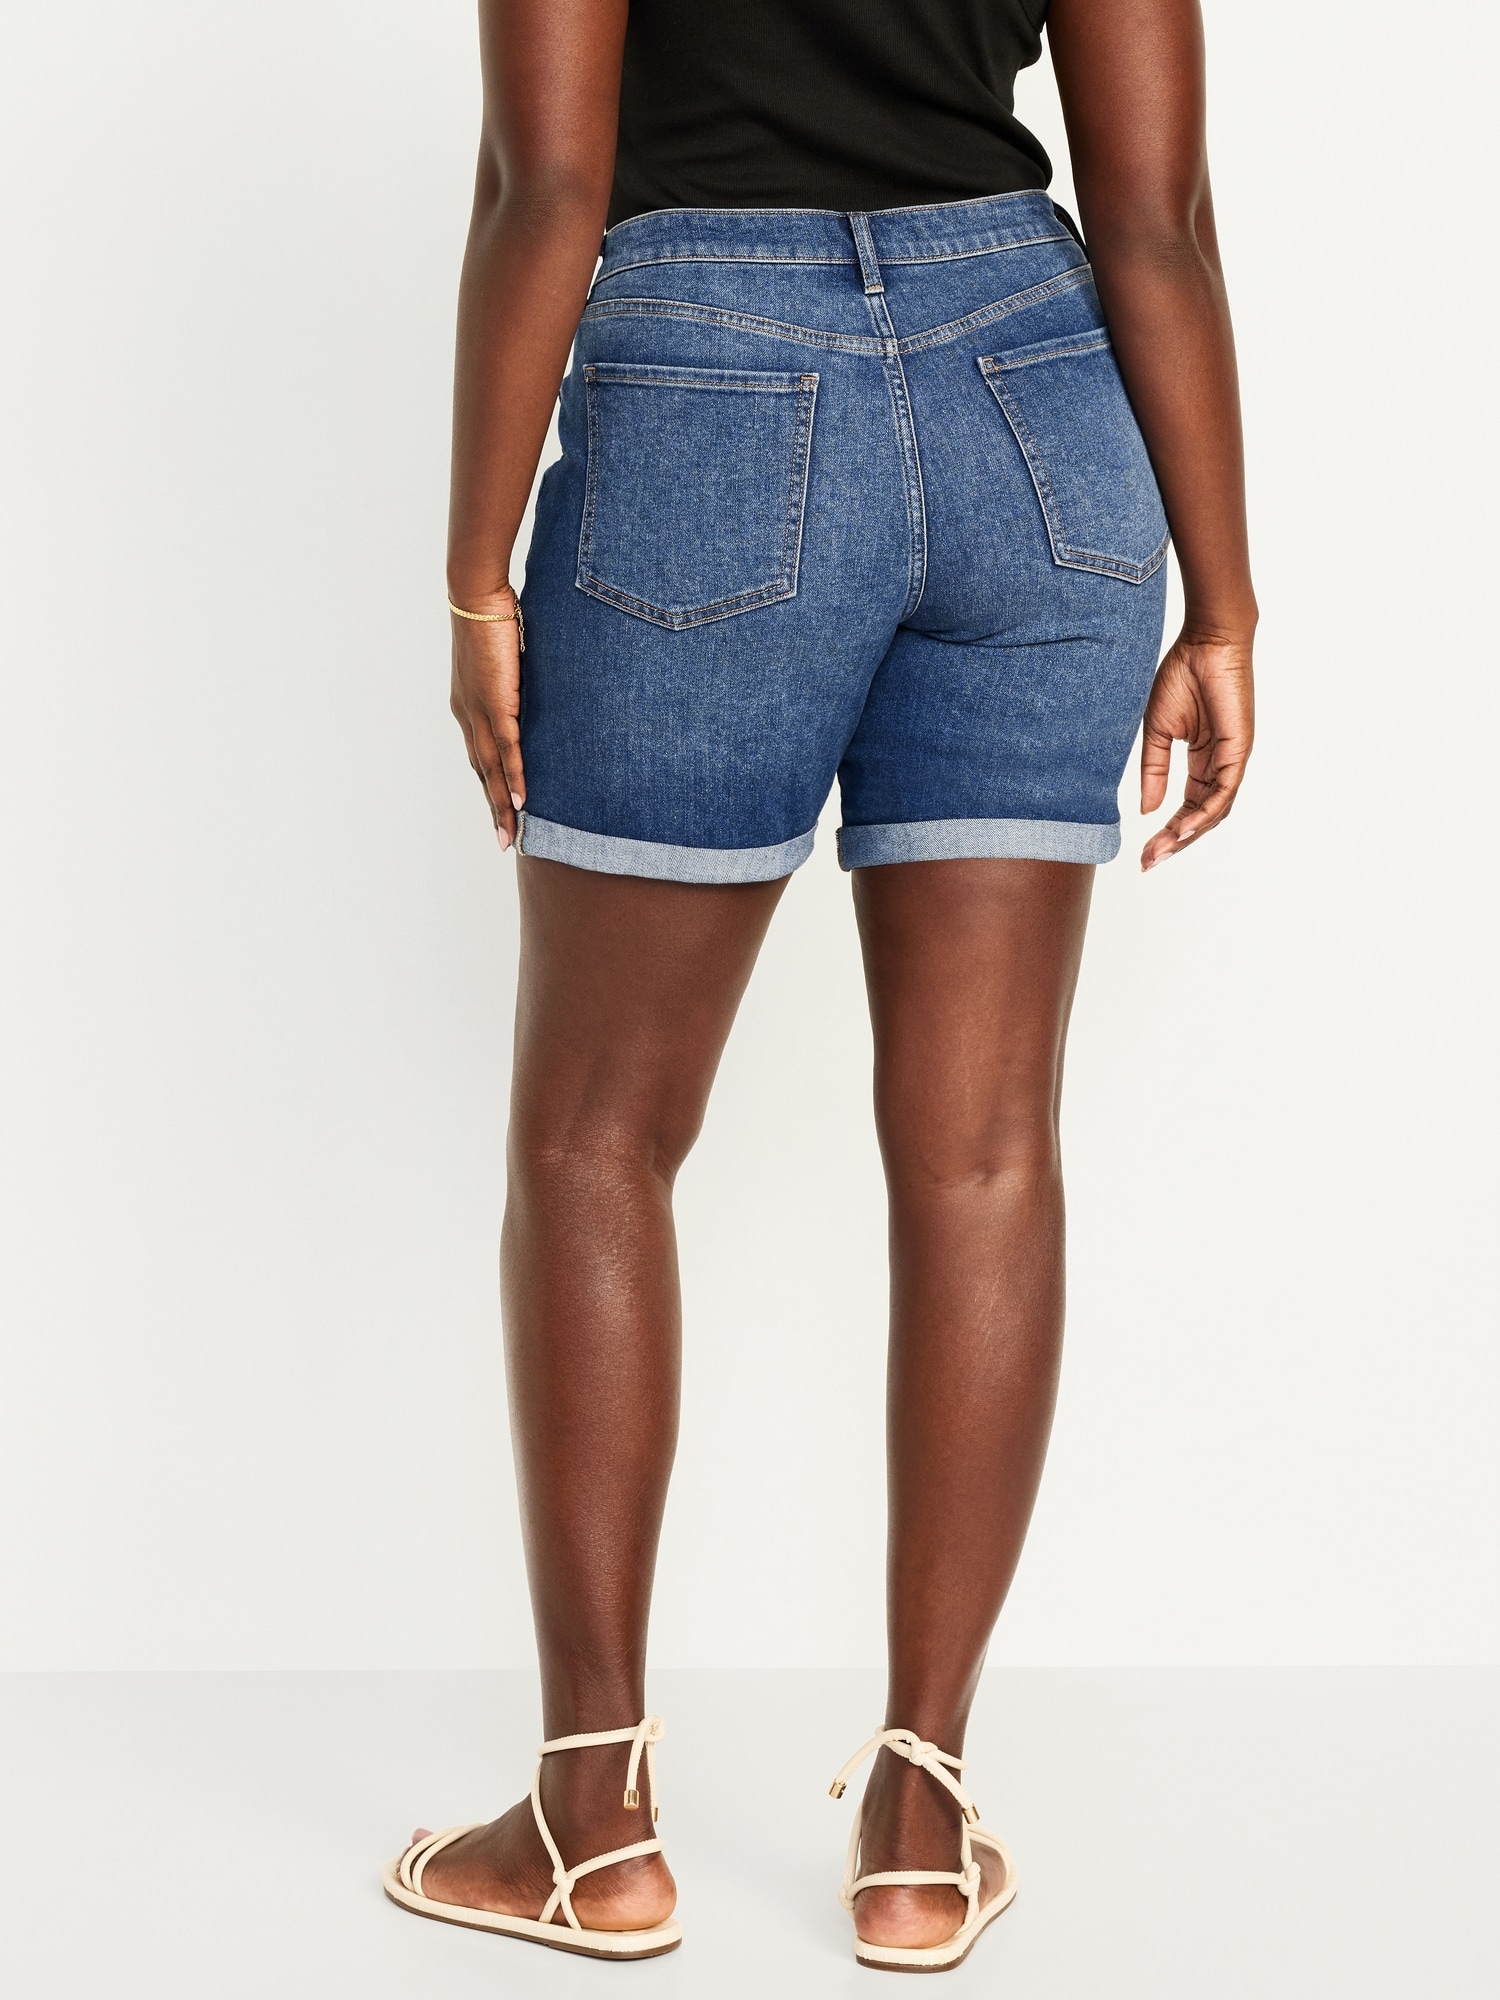 Old Navy Women's High-Waisted Wow Jean Shorts -- 7-Inch Inseam - - Plus Size 20